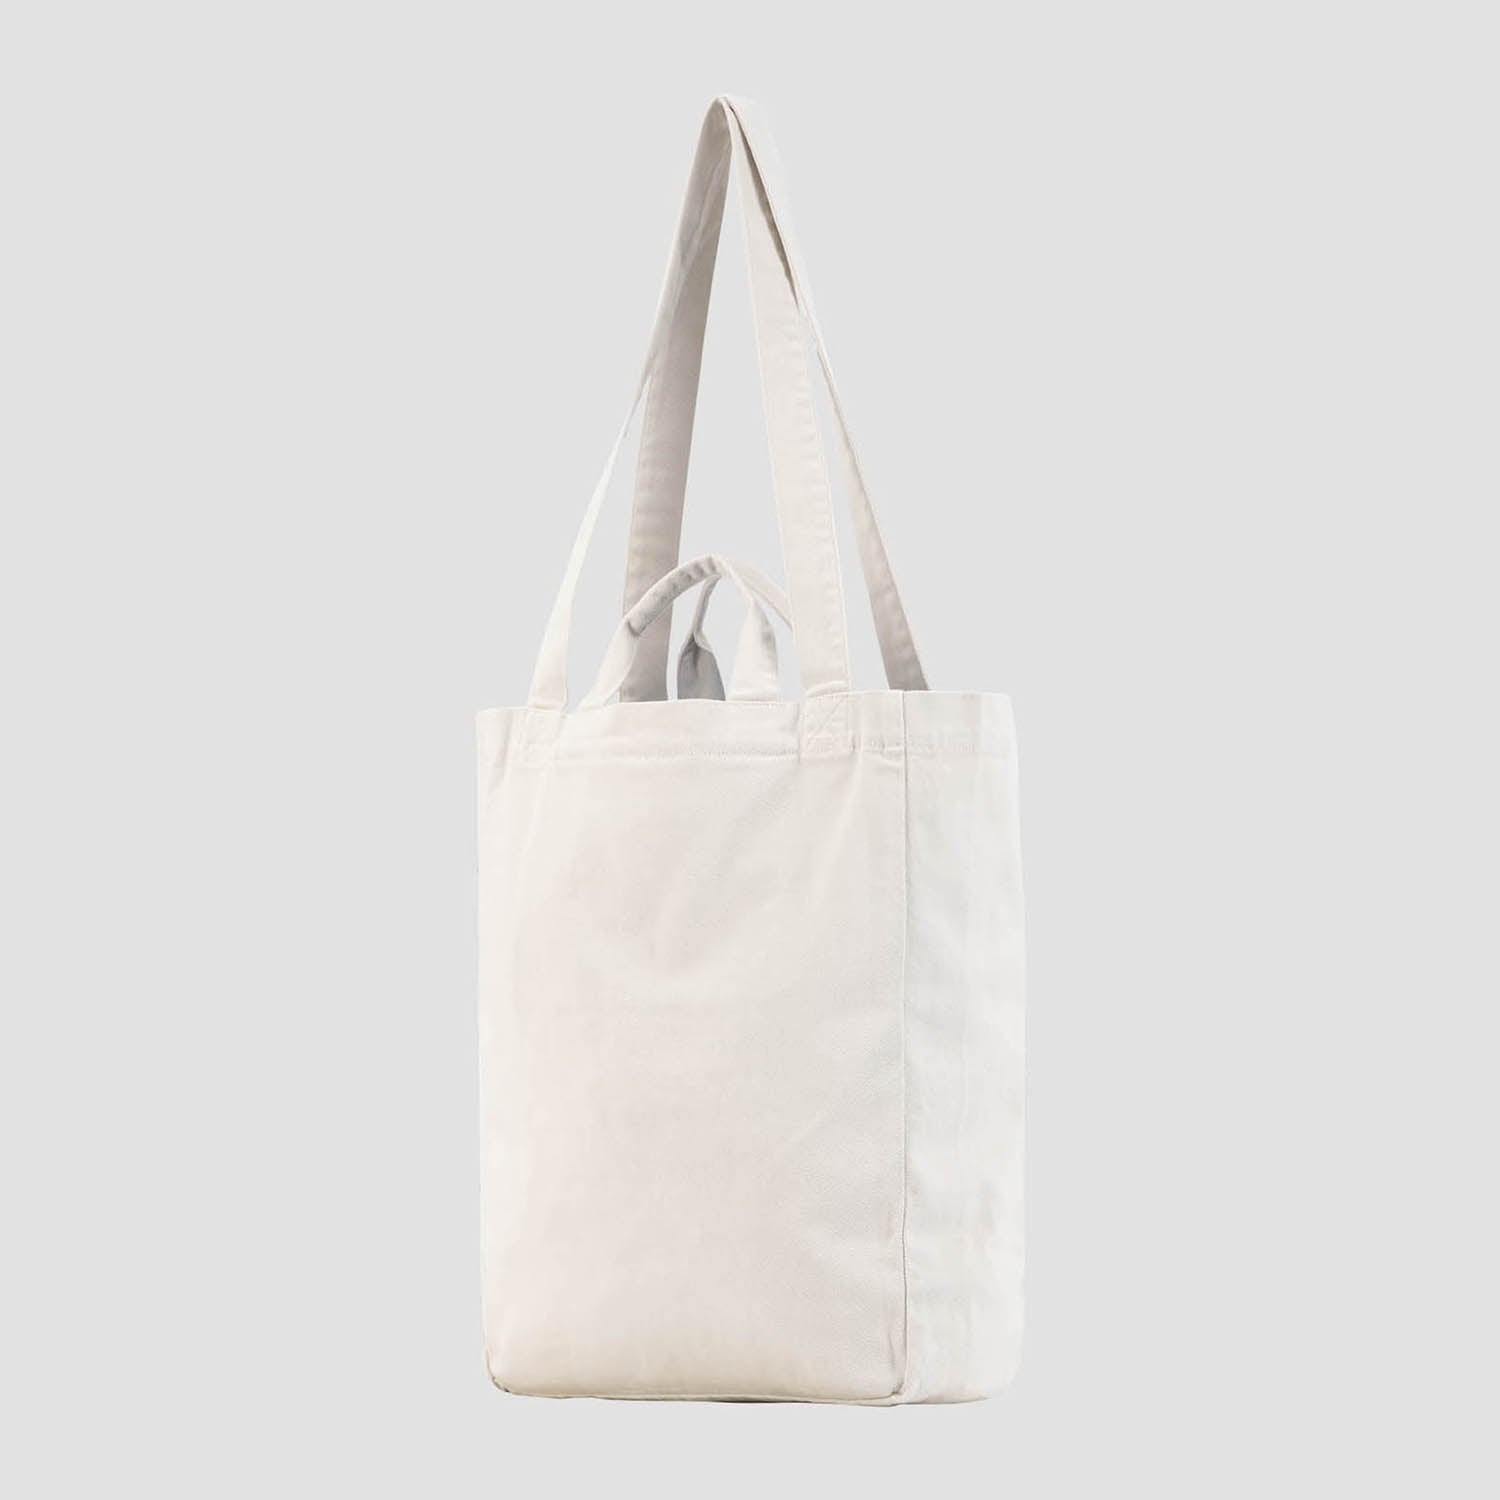 Share 71+ small white bags with handles - in.duhocakina